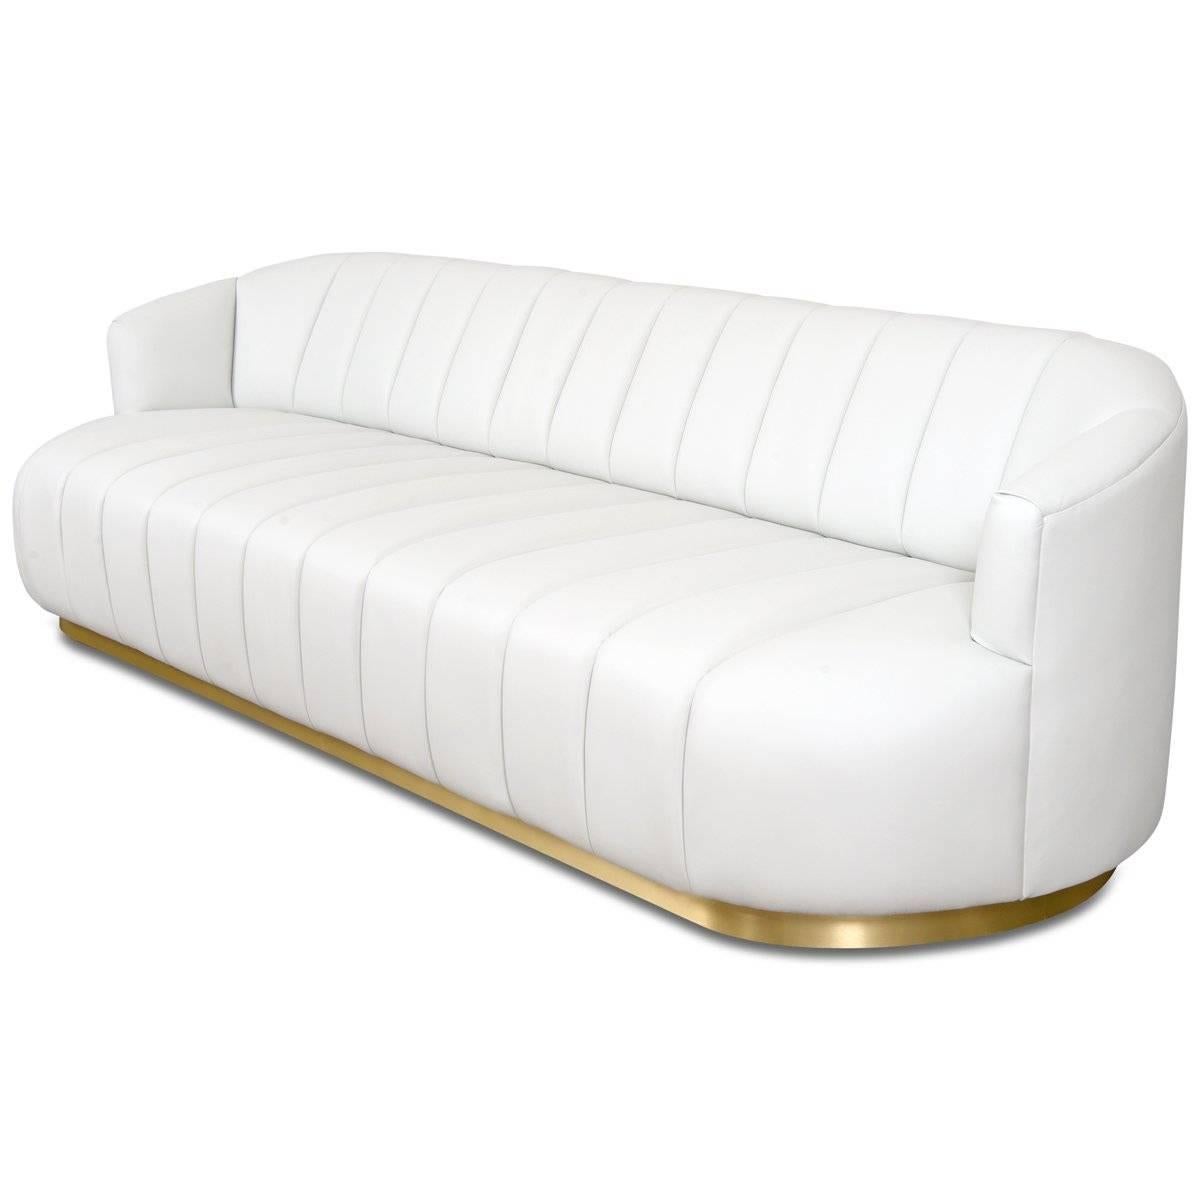 Introducing the Avalon Sofa in faux leather. This bold sofa features top to bottom channel tufting in the front and a smooth back. A shiny brass veneer toe kick adds a touch of cool metal contrast to this trendy sofa and a slightly pitched back adds